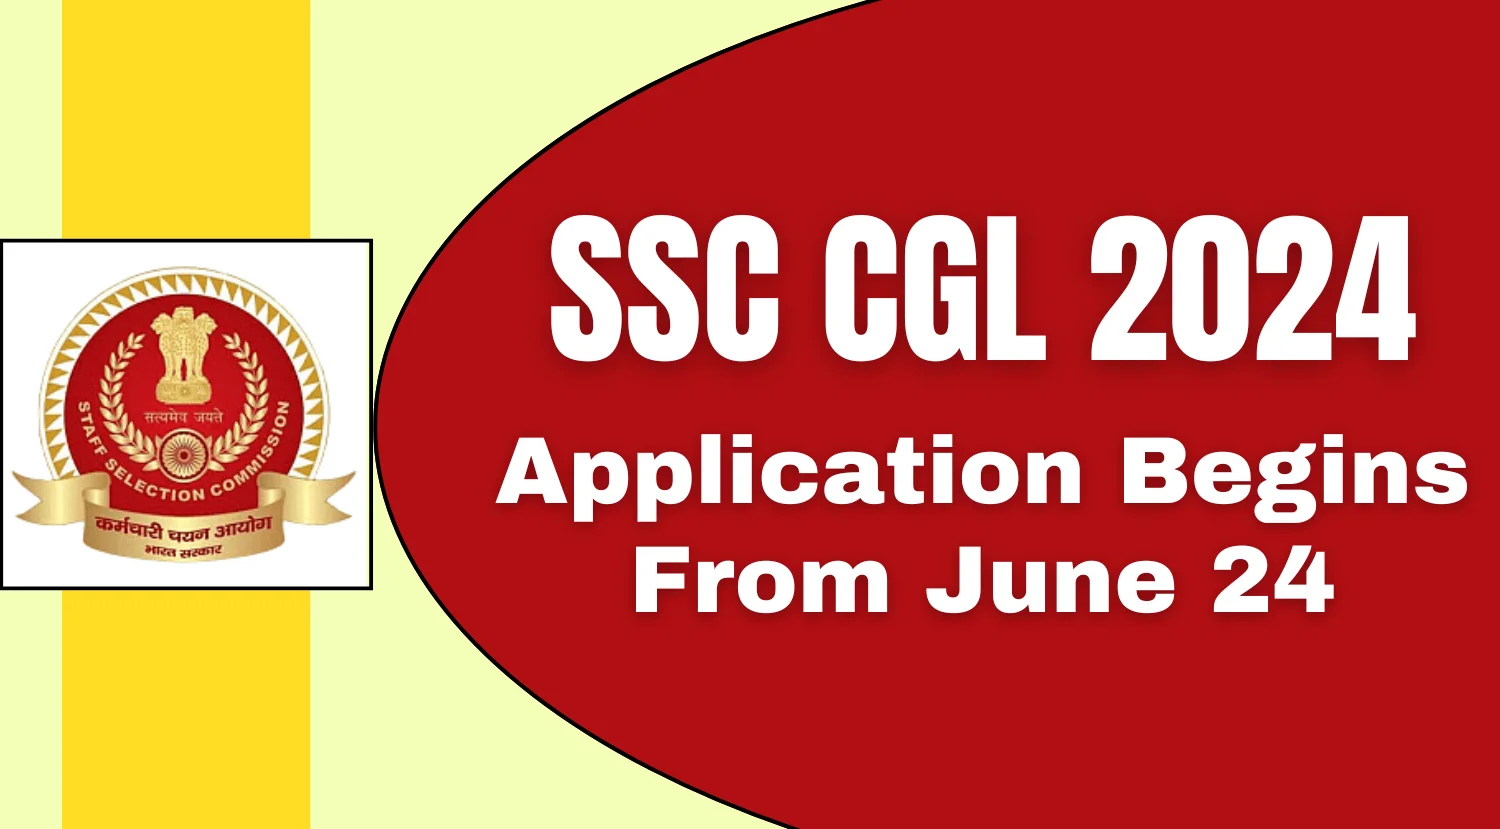 SSC CGL Recruitment 2024 Registration Begins from 24th June